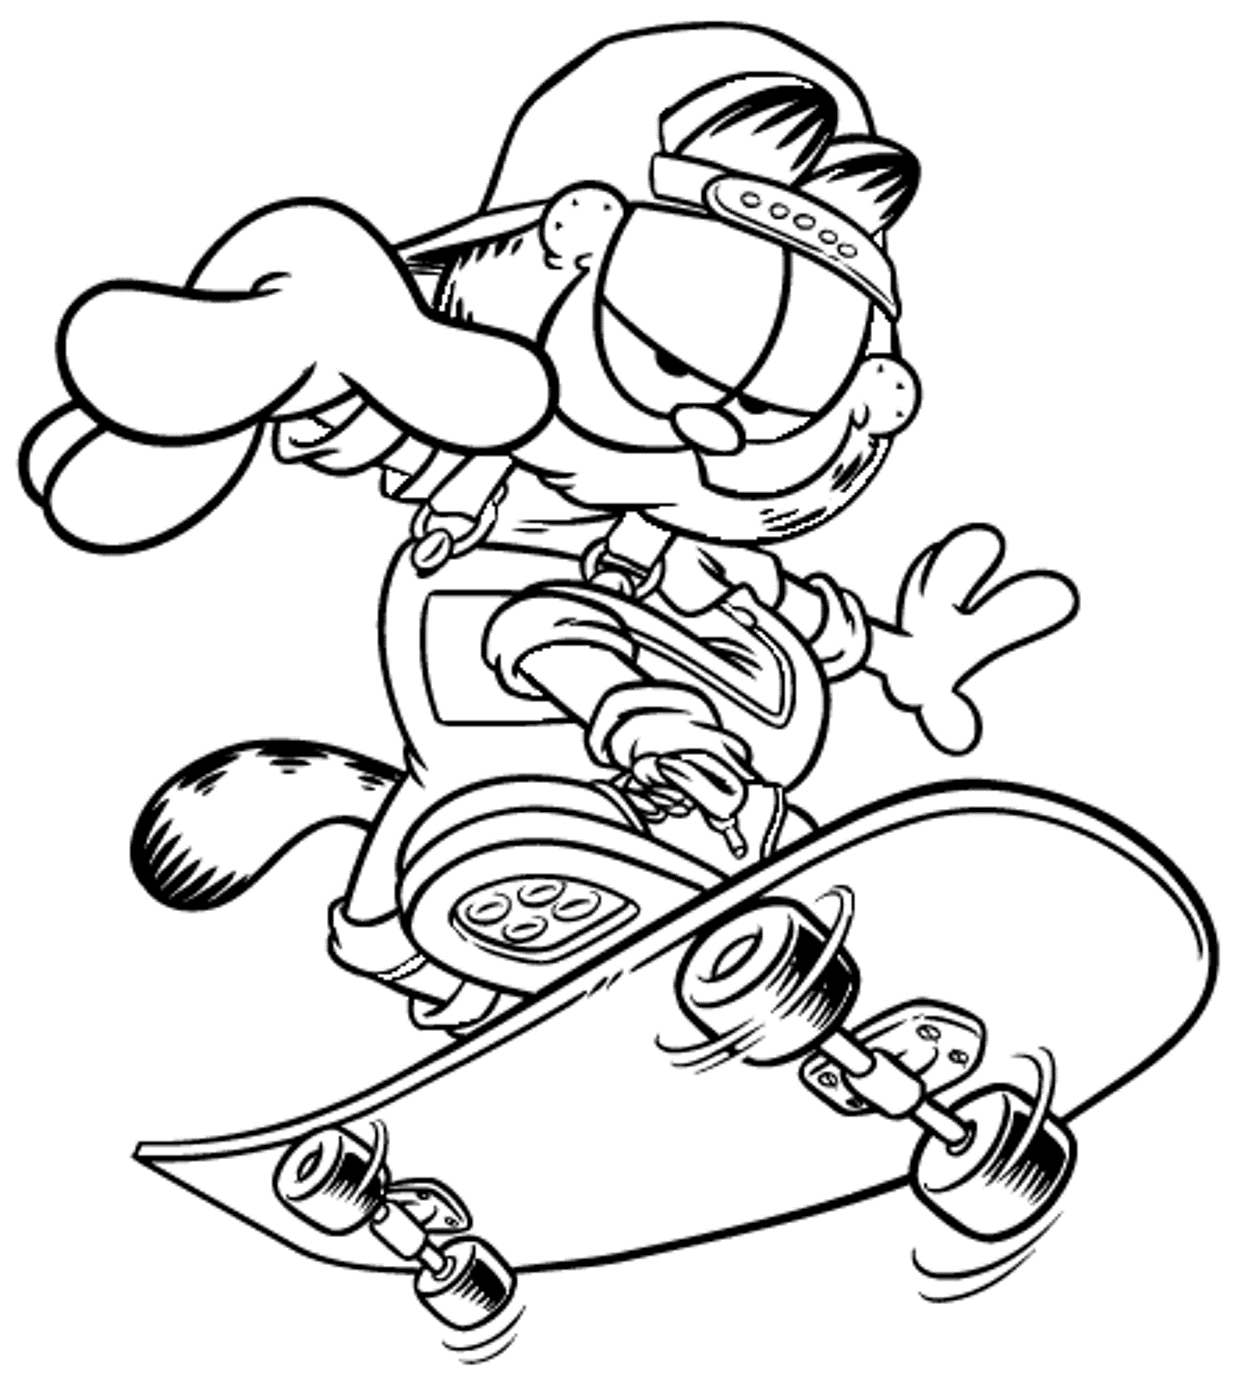 garfield coloring garfield coloring pages minister coloring coloring garfield 1 1